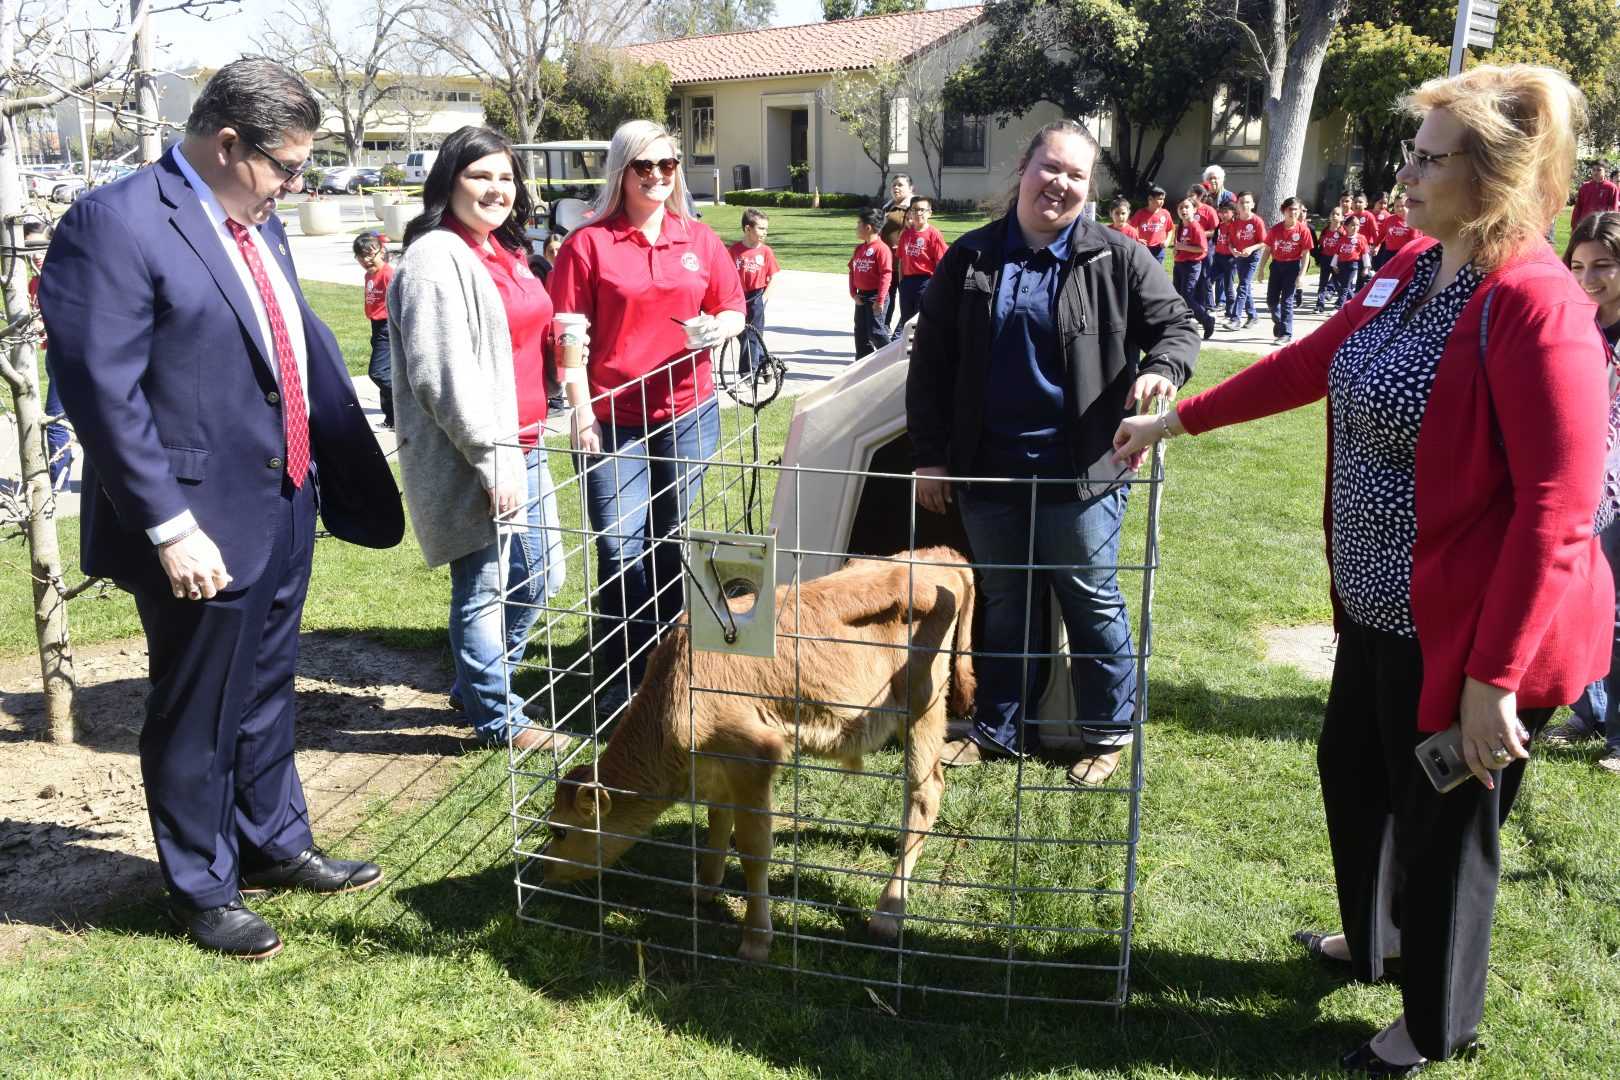 Fresno+State+President+Dr.+Joseph+I.+Castro+and+his+wife+Mary+obsvere+a+livestock+exhibit+during+National+Ag+Day+on+Thursday%2C+March+14%2C+2019.+%28Geoff+Thurne%2FJordan+College+of+Agricultural+Sciences+and++Technology%29